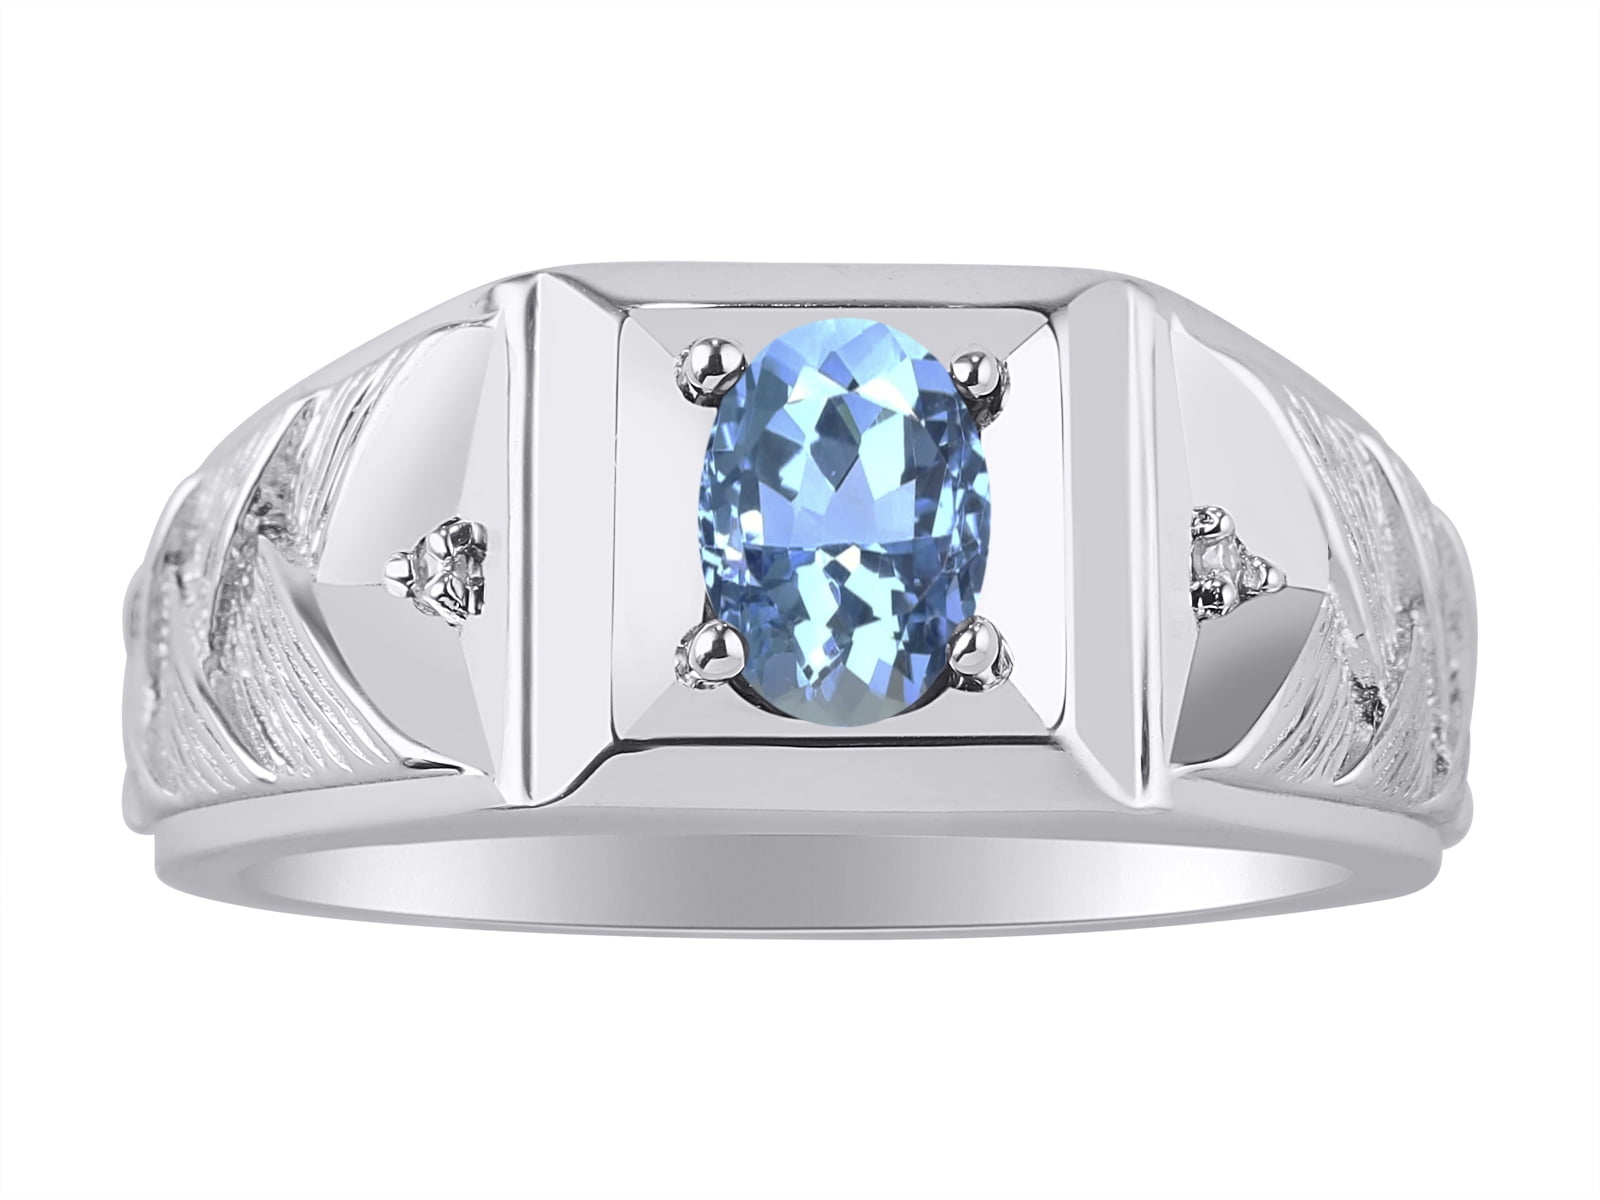 Sterling Silver Men Ring Jewelry Oblong Simulated Blue Topaz CZ Size 11 Birthday